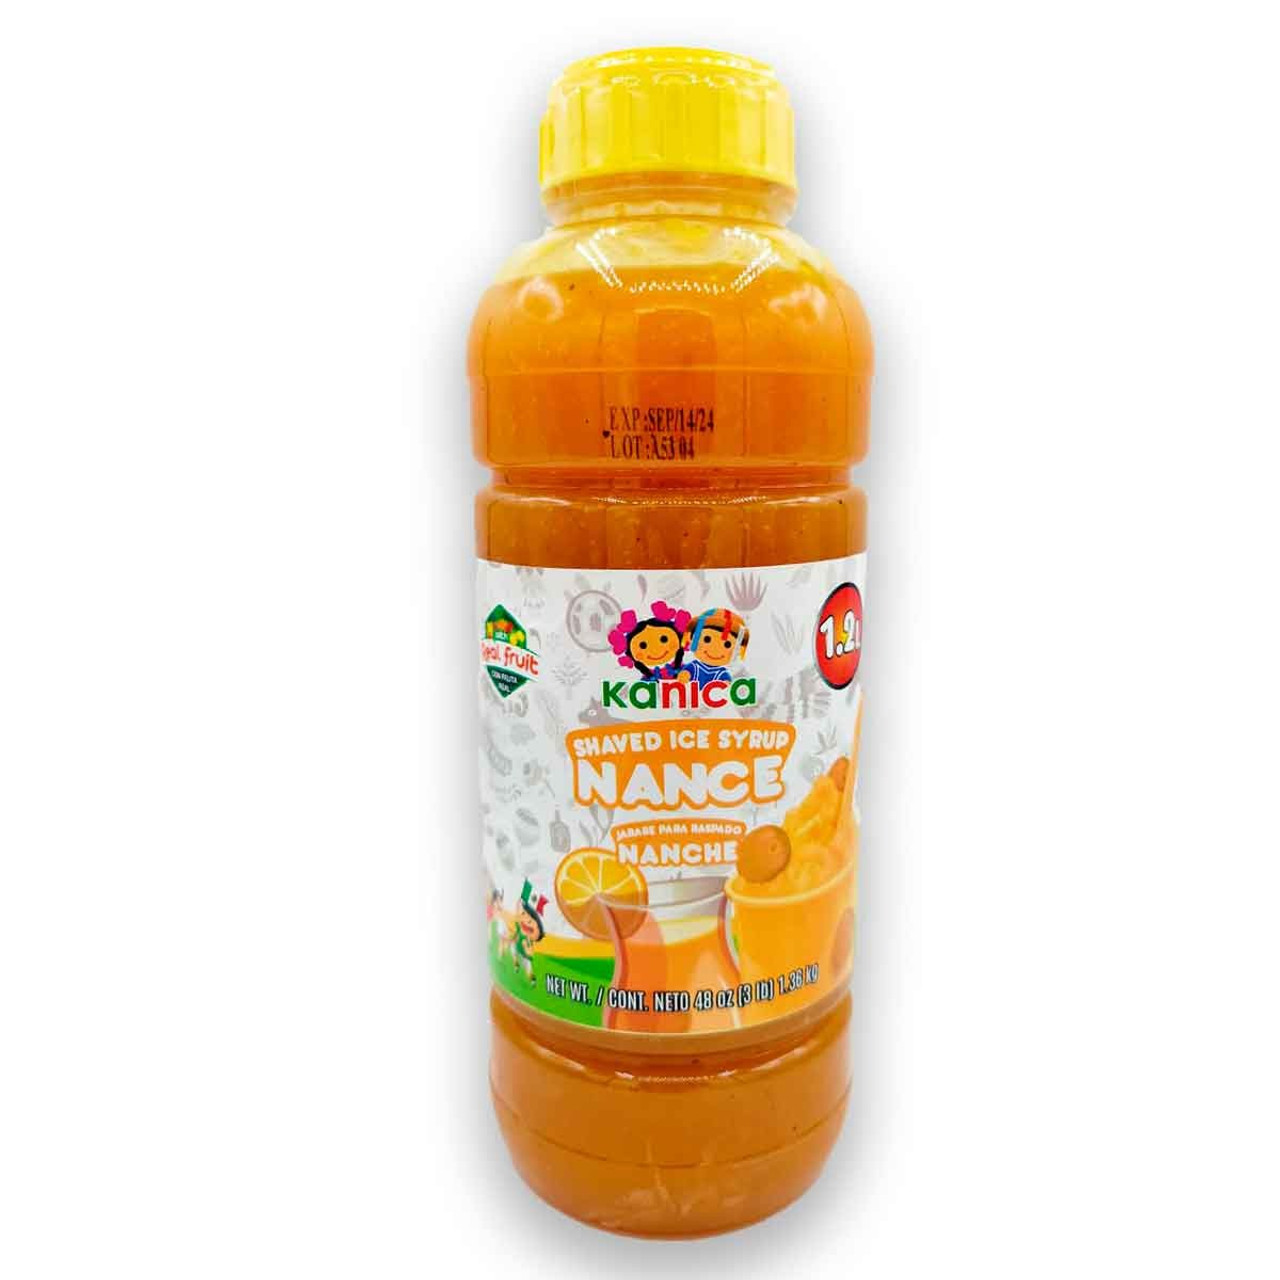 Delicious syrup flavored with the tasty and fruity essence of "Nanches". This product is perfect for a shaved ice in the summer and hot afternoons.